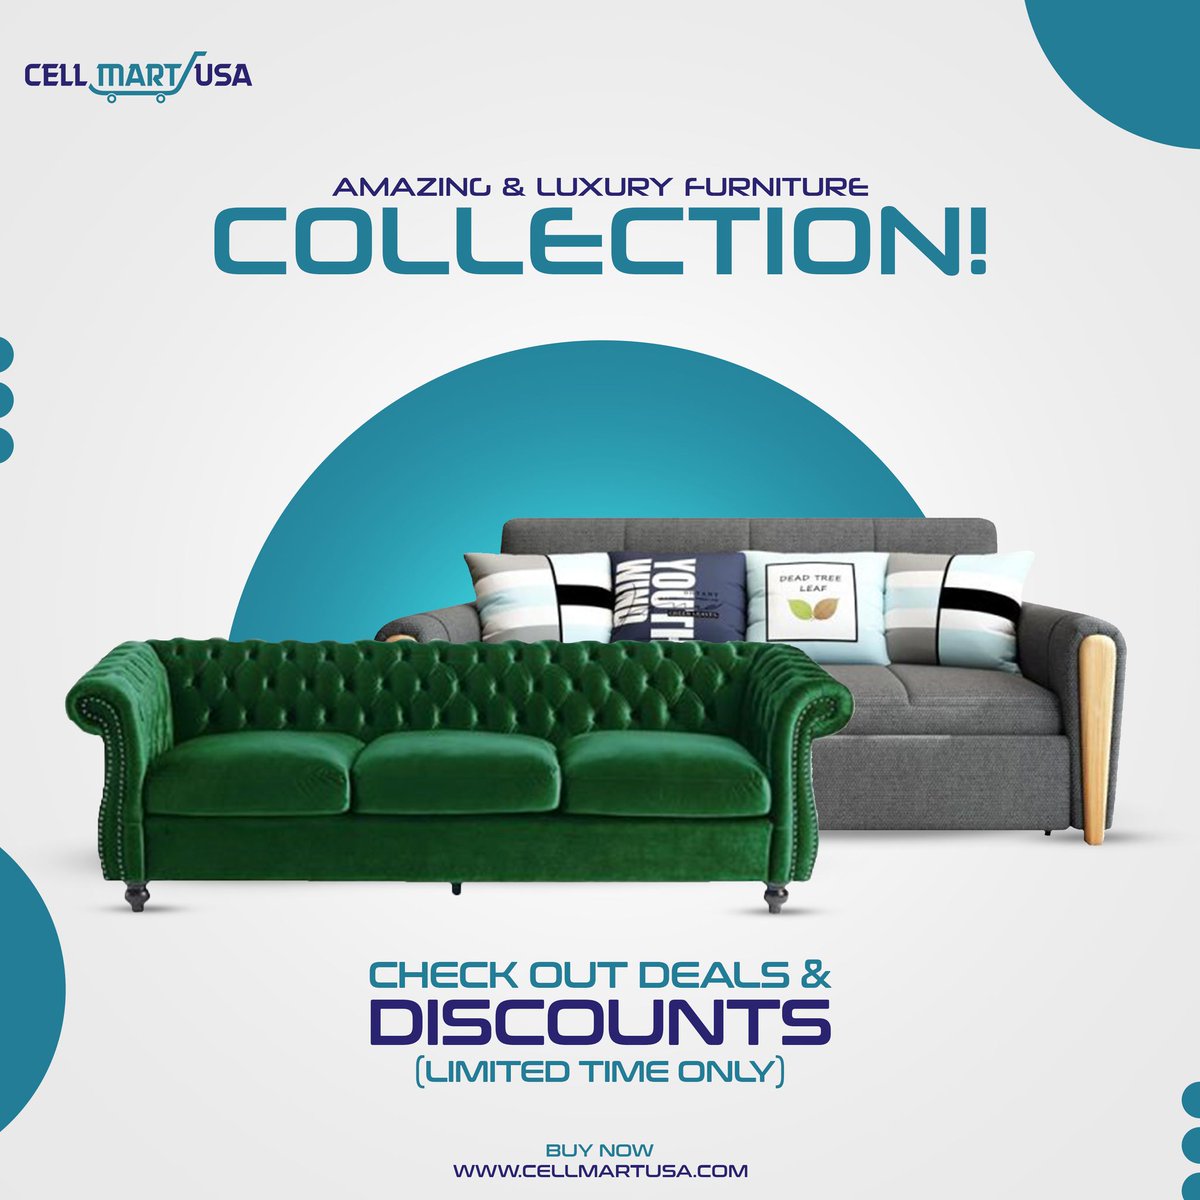 Visit our furniture collection and find the furniture for your home!

#onlineshoppingusa #onlineshoppingsite #onlineshoppingaddict #clothingforsale #70offsale #apparelcollection #apparelandaccessories #cellmartusa #woodbed #comfortbed